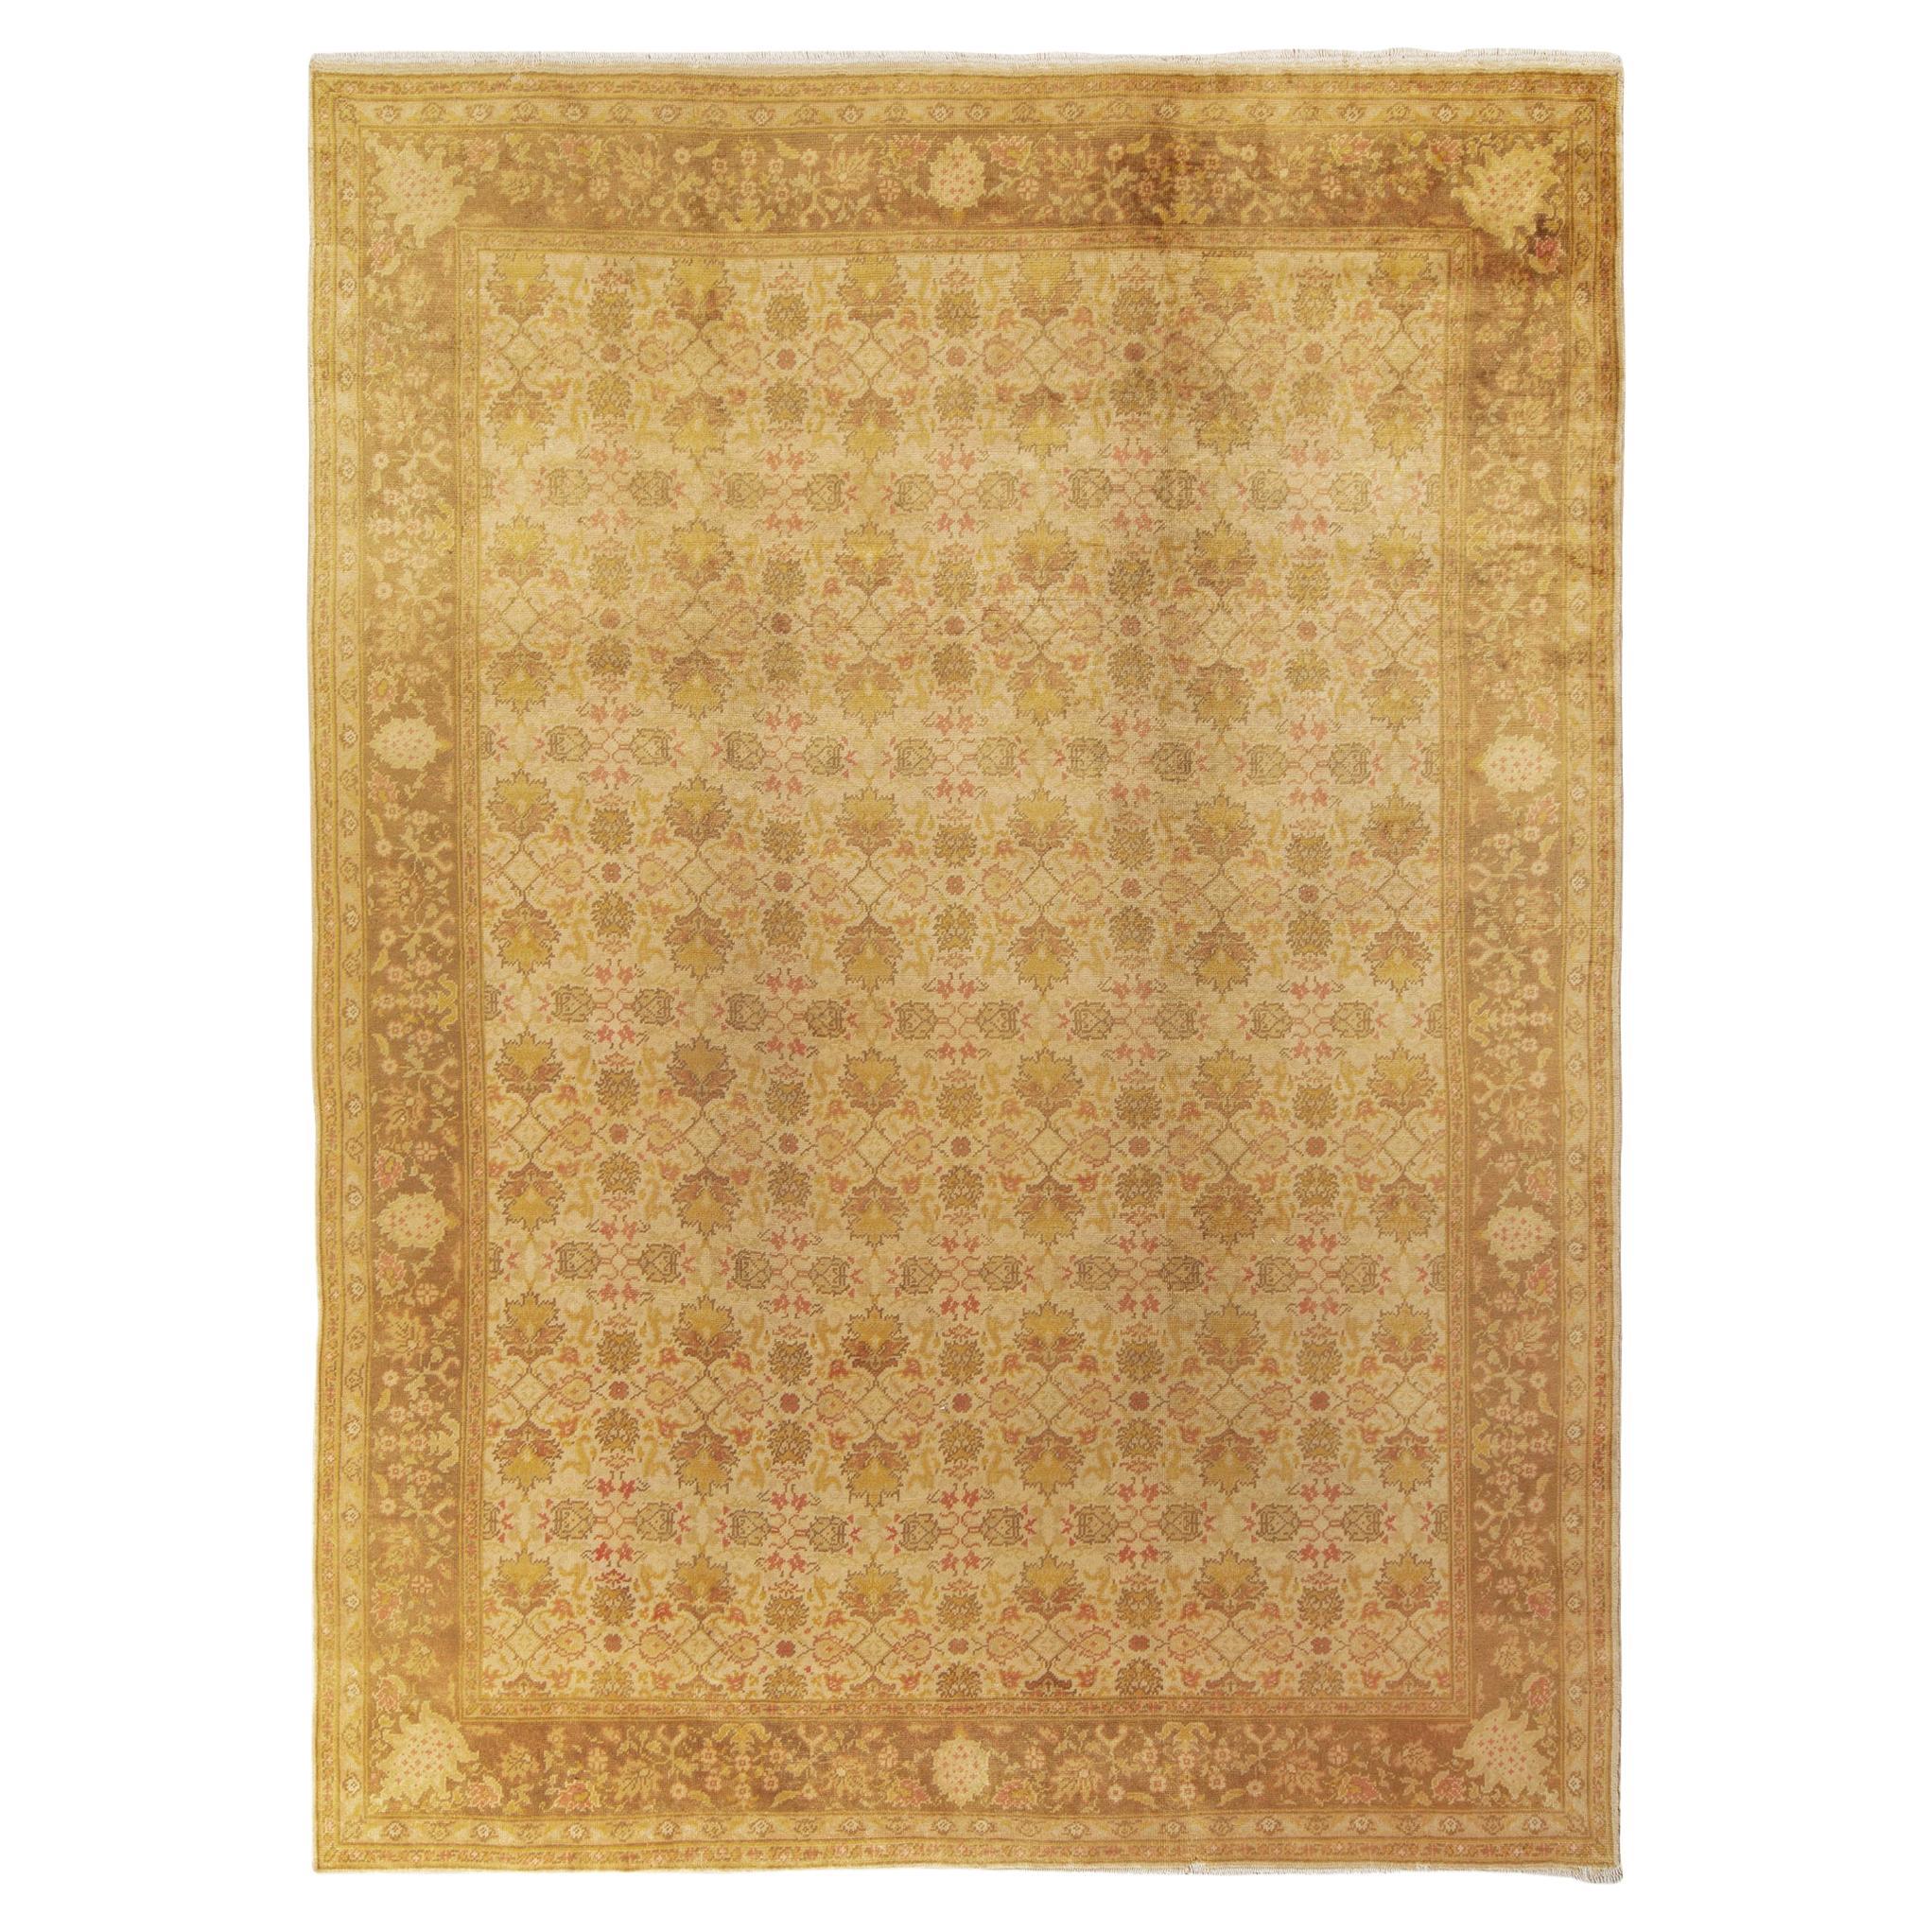 Vintage Oushak-Style European Rug in Gold and Beige-Brown Floral Pattern For Sale